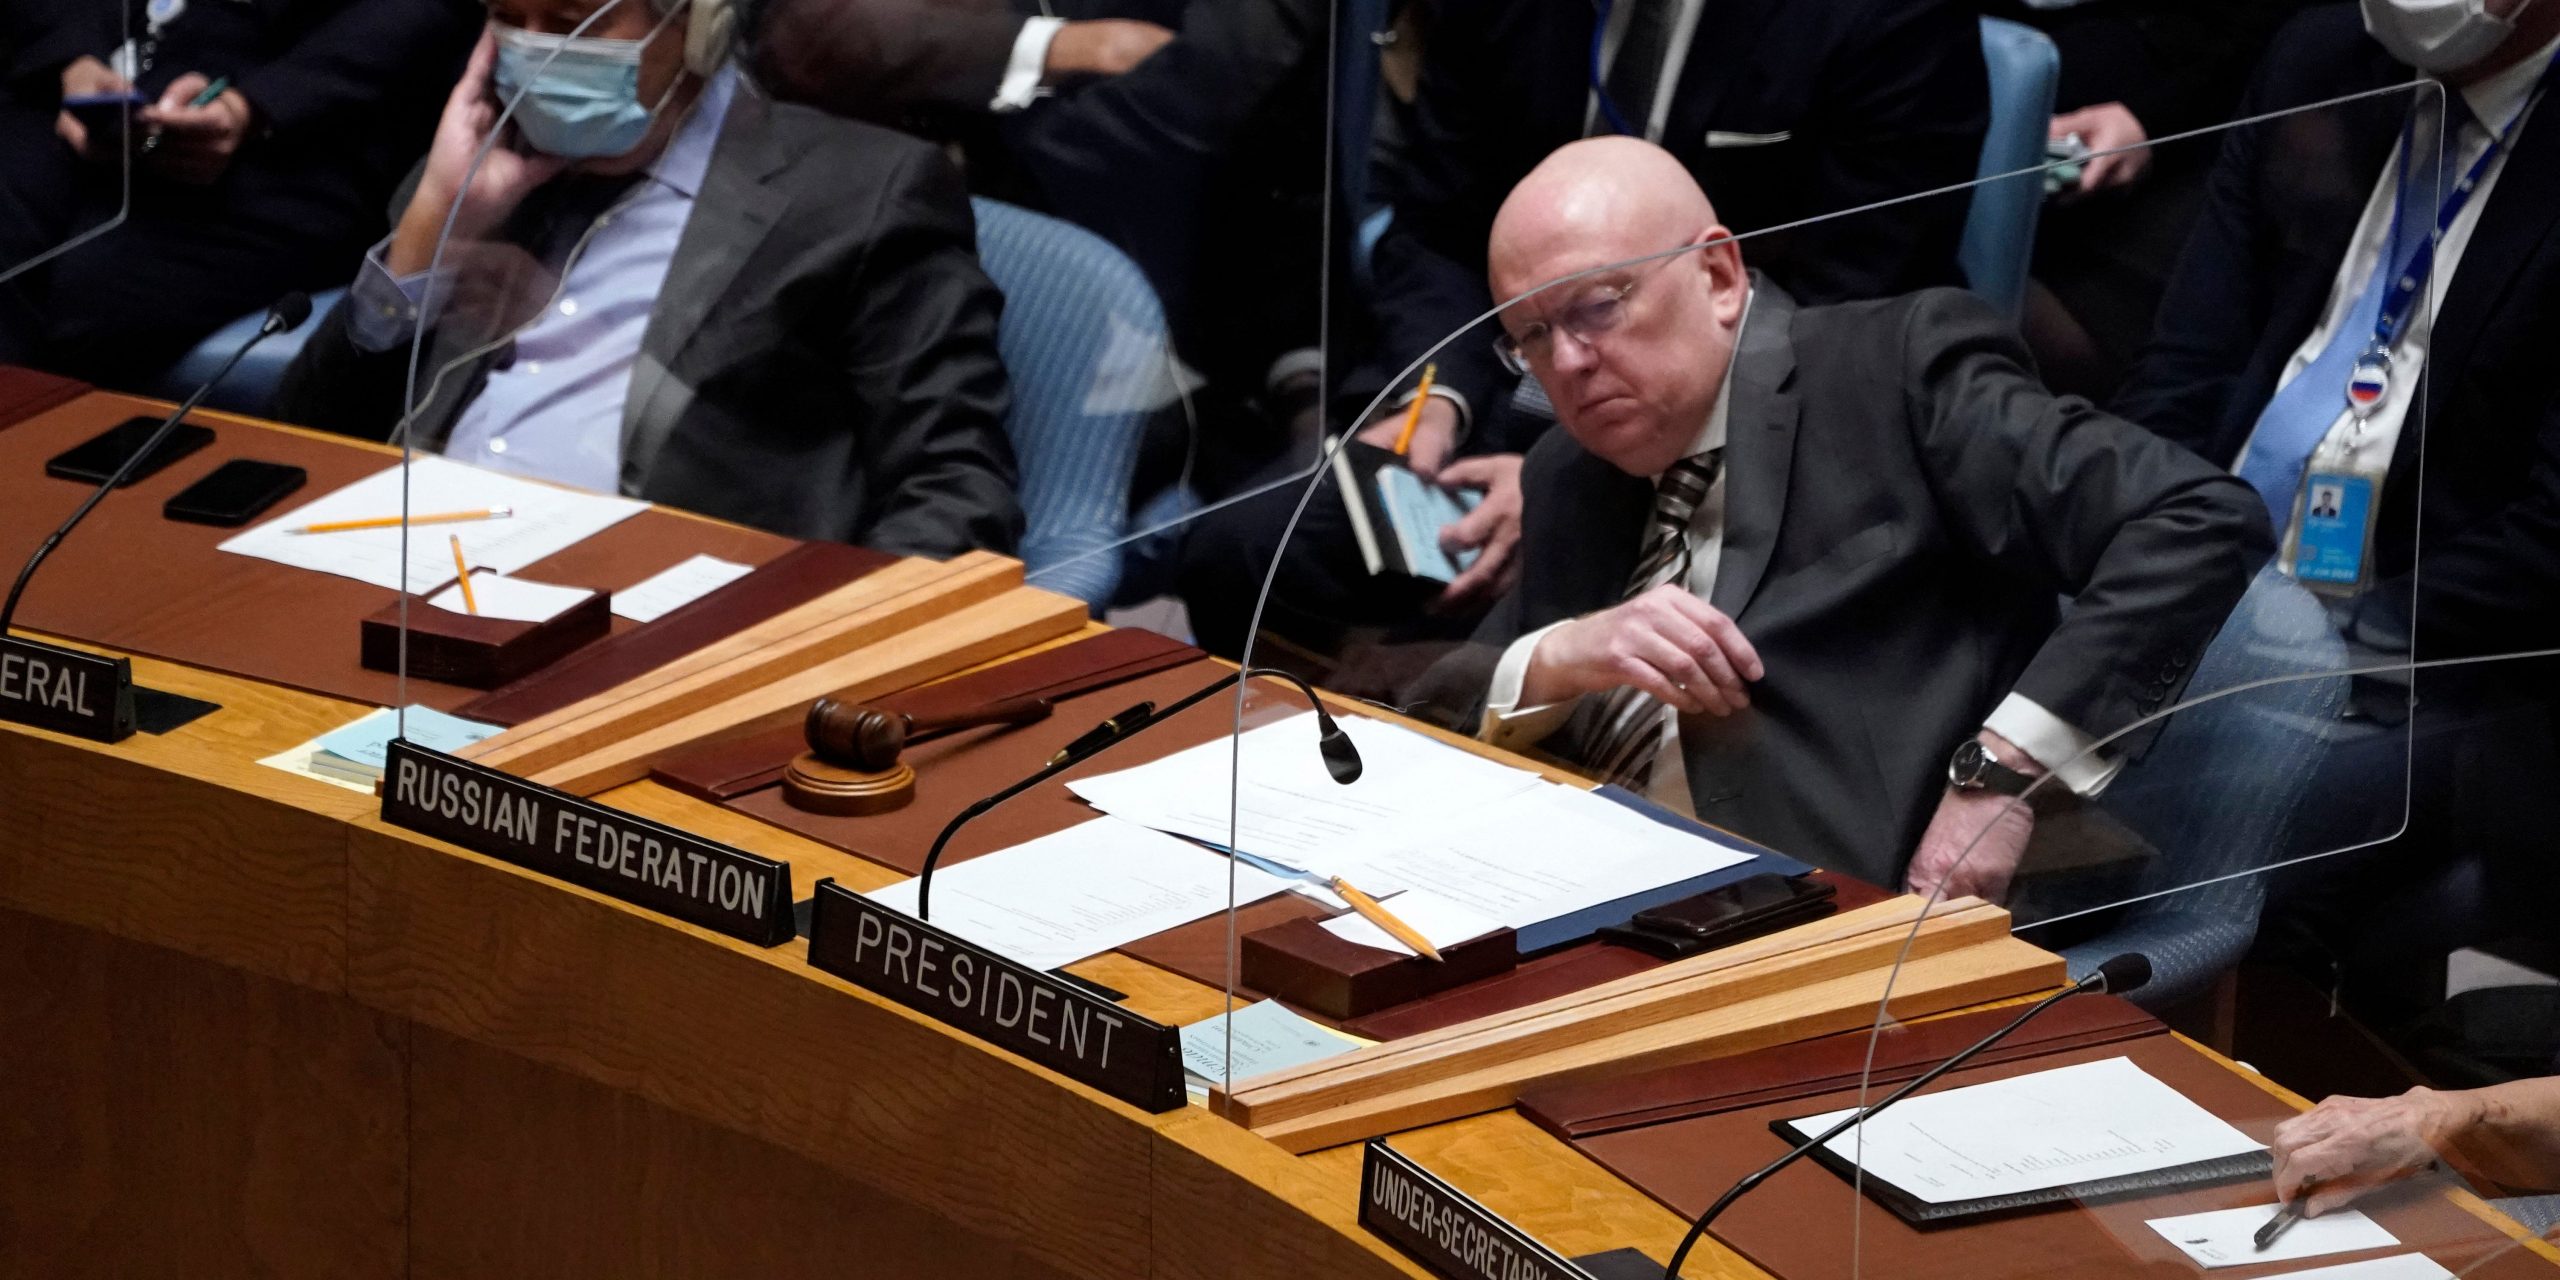 Permanent Representative of the Russian Federation to the UN, Vasily Nebenzya (R) and UN Secretary-General Antonio Guterres (L) attend an emergency meeting of the UN Security Council on Ukraine in New York on February 23, 2022.